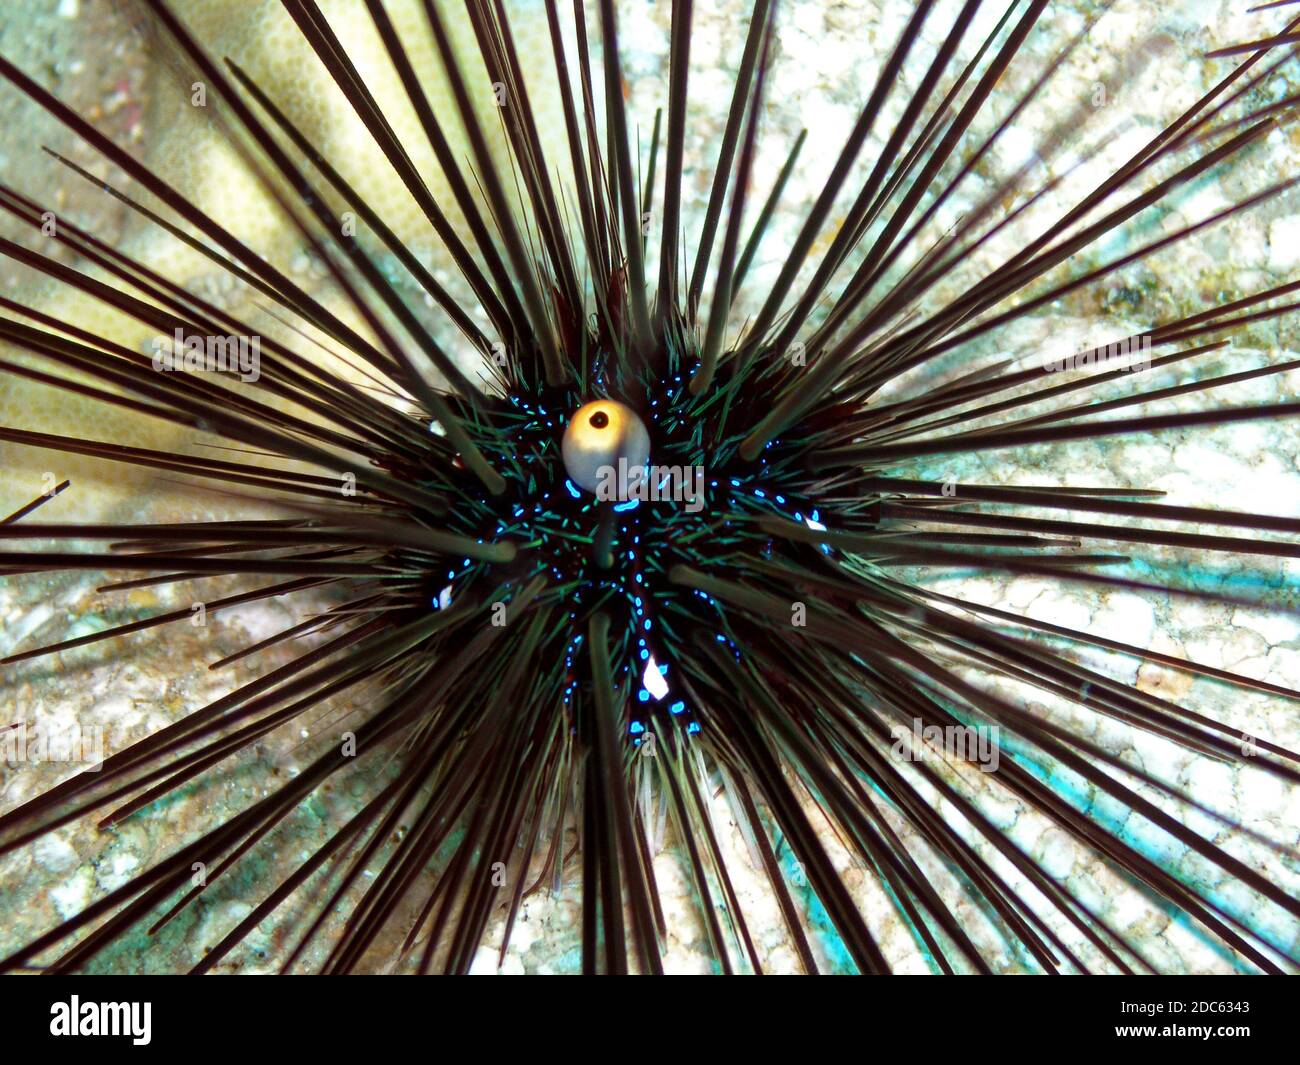 Long-spined urchin, Koh Chang, Thailand, Underwater photograph Stock Photo